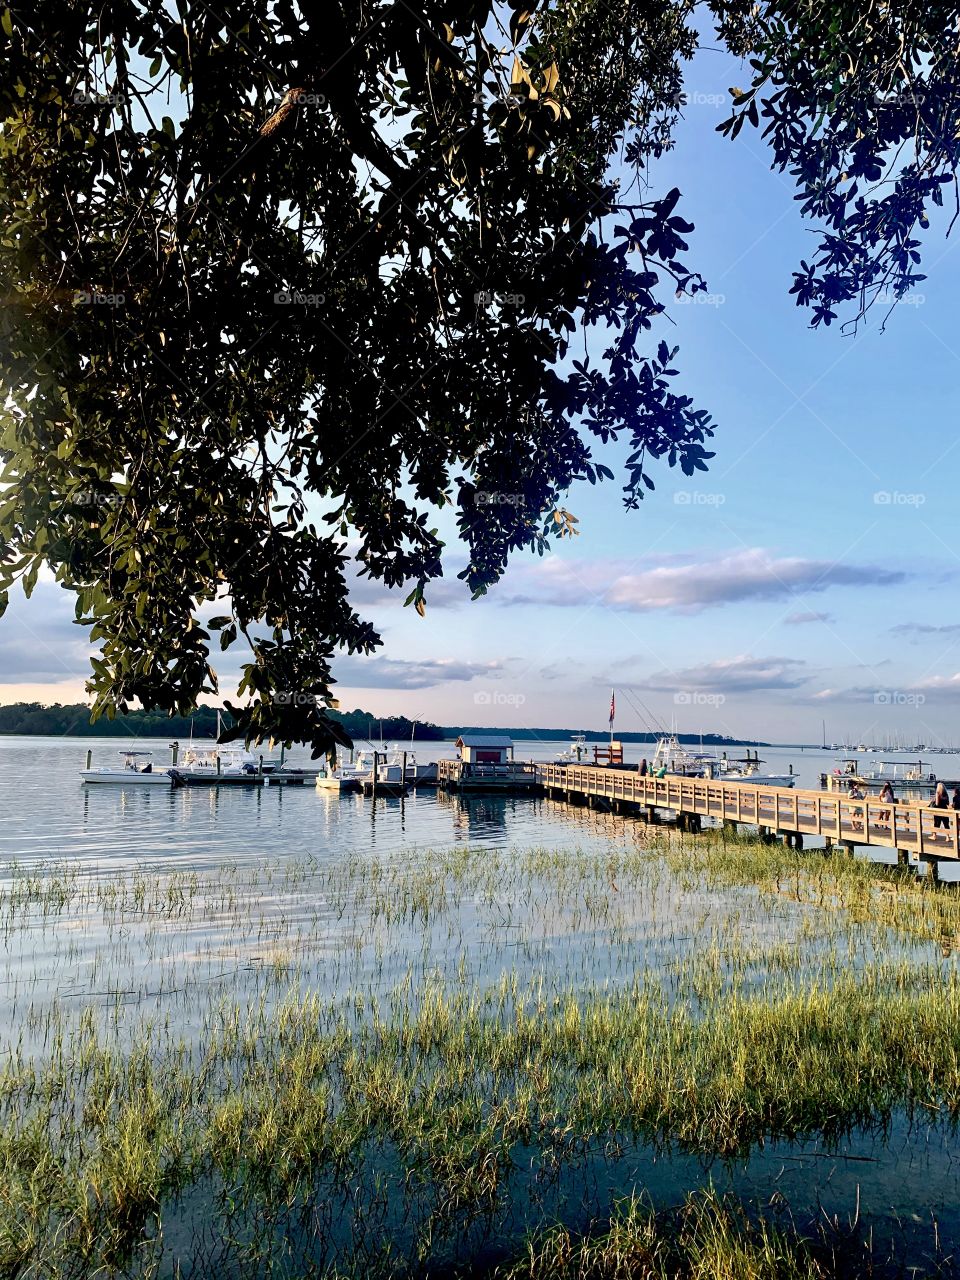 Tree hanging over a body of water with weeds growing at the shore and many floating on top with a dock and the sun starting to set in a blue sky. 